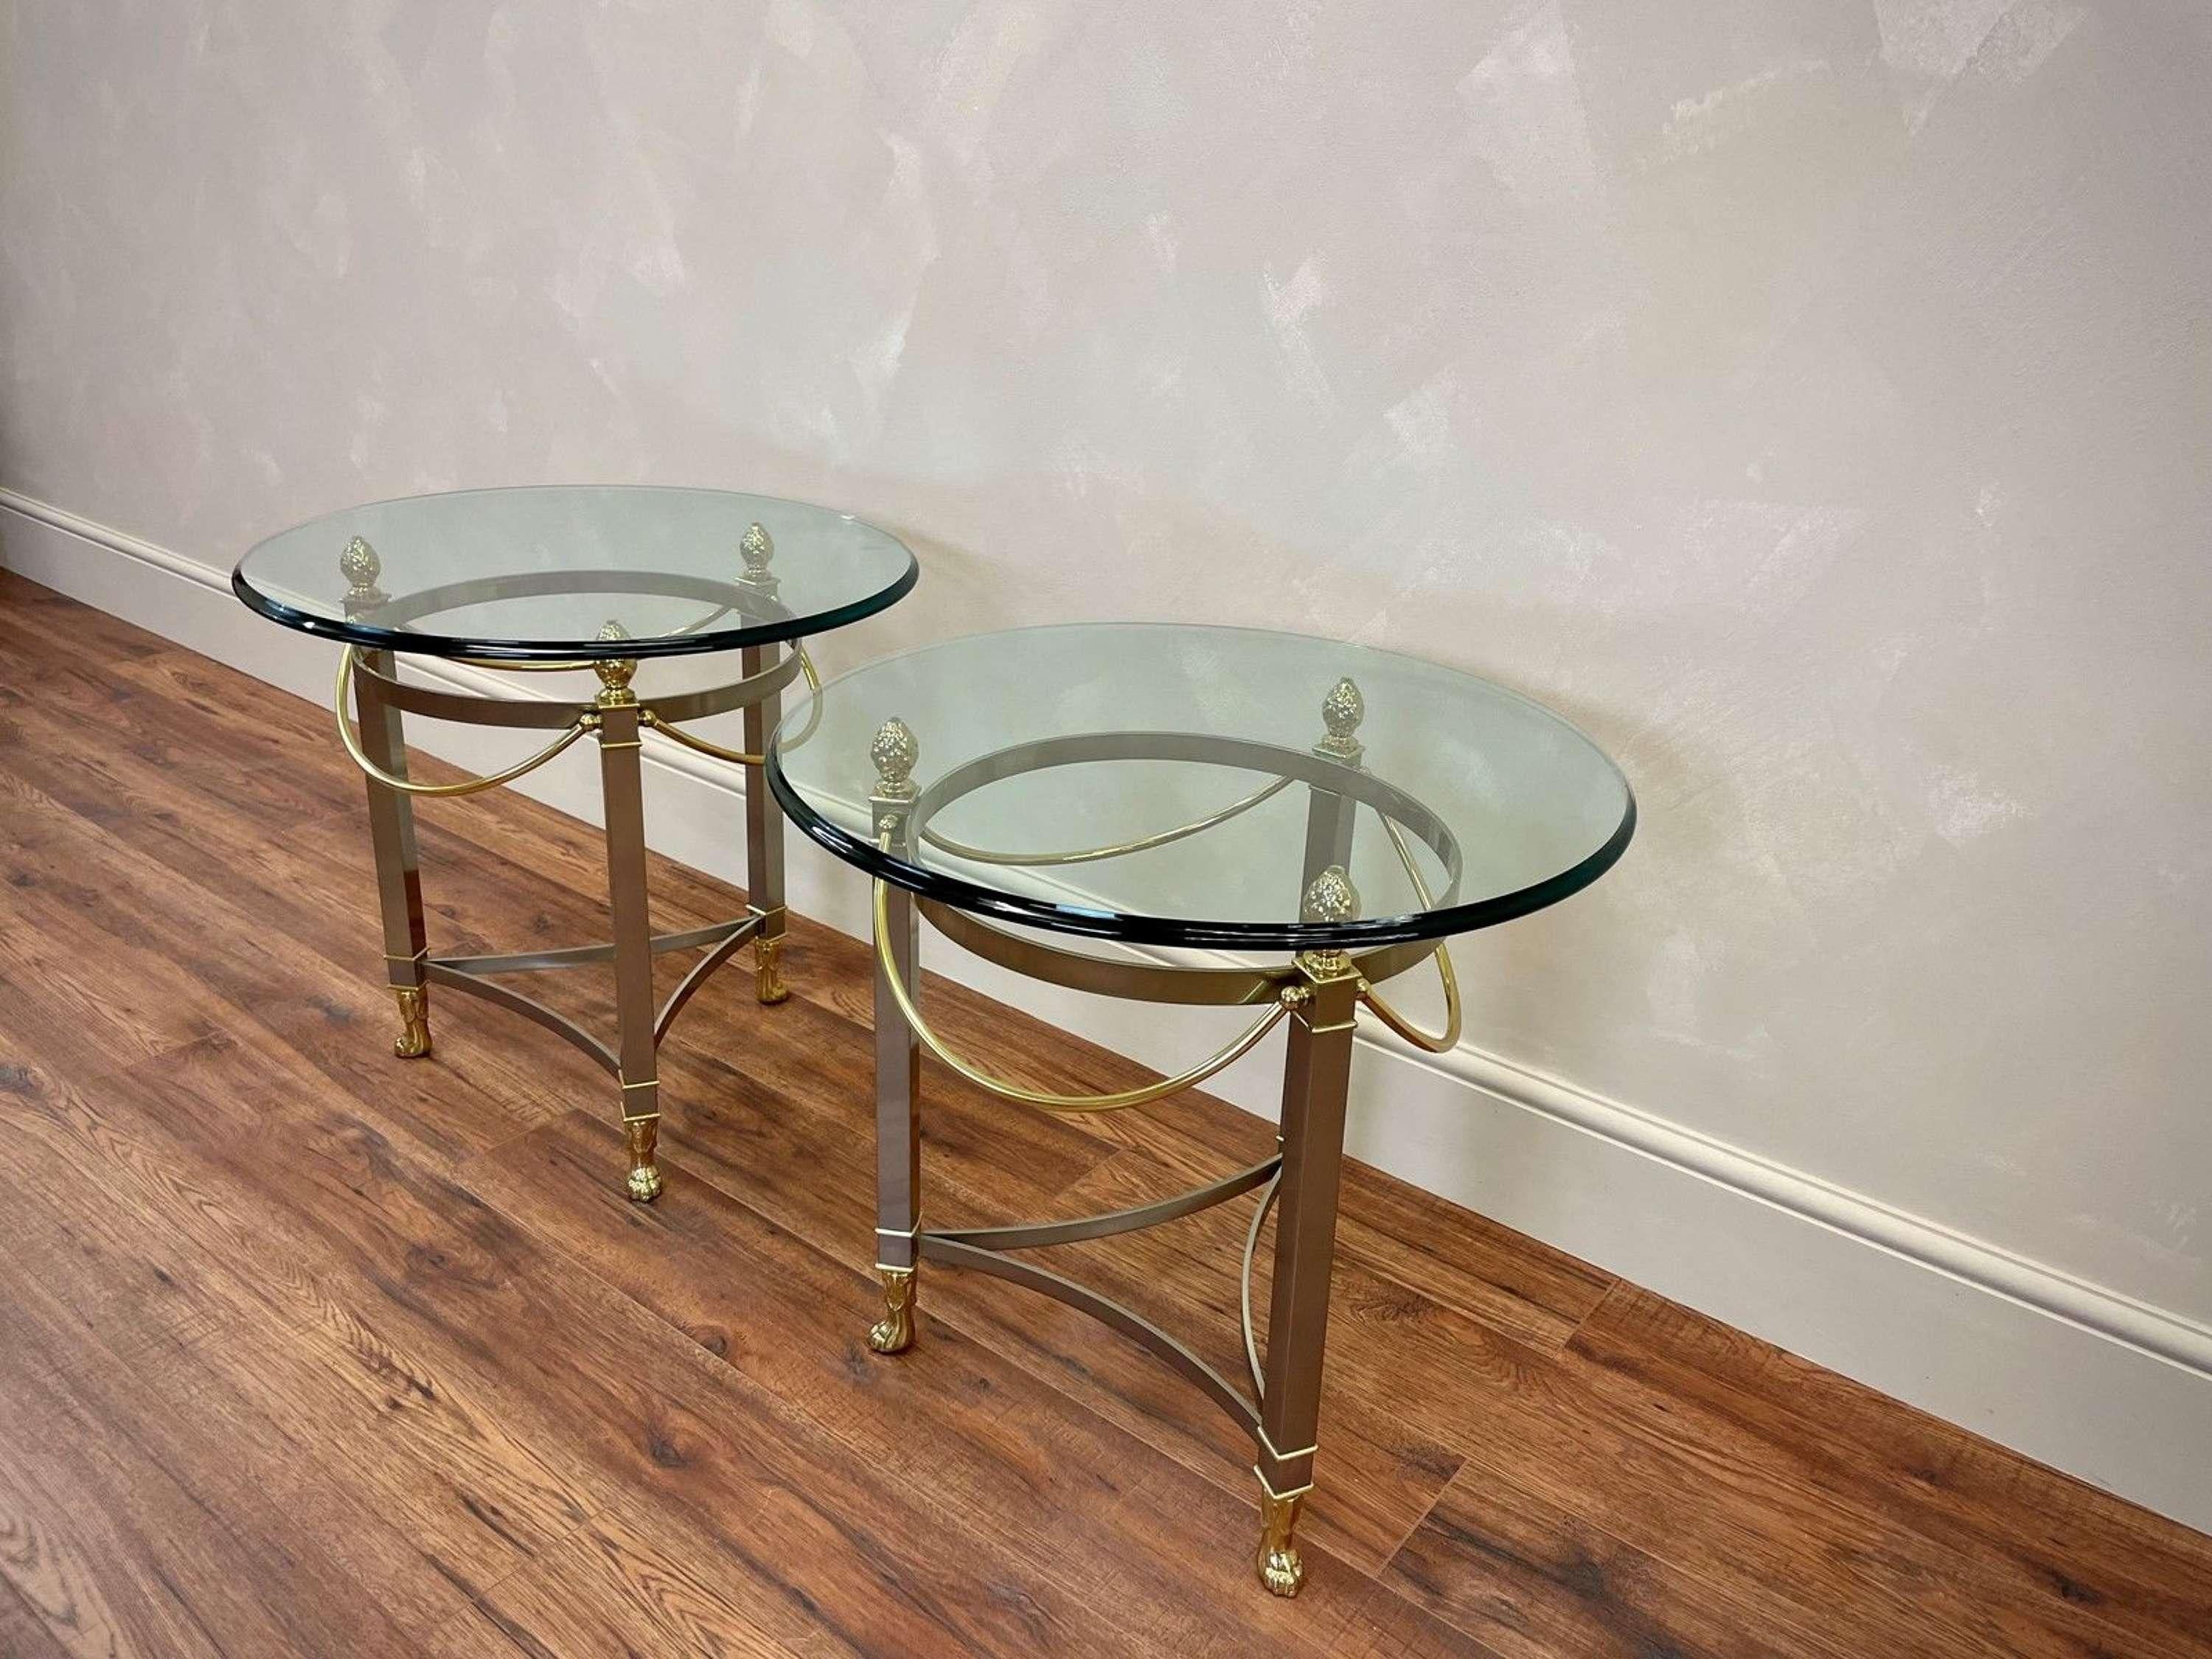 Italian, 20c Hollywood Regency style, midcentury side tables in glass, brass and brushed chrome.
Thick, glass tops with bevelled edge resting on gold pineapple supports.
Age related wear 
Lion paw feet finish the angular and swag